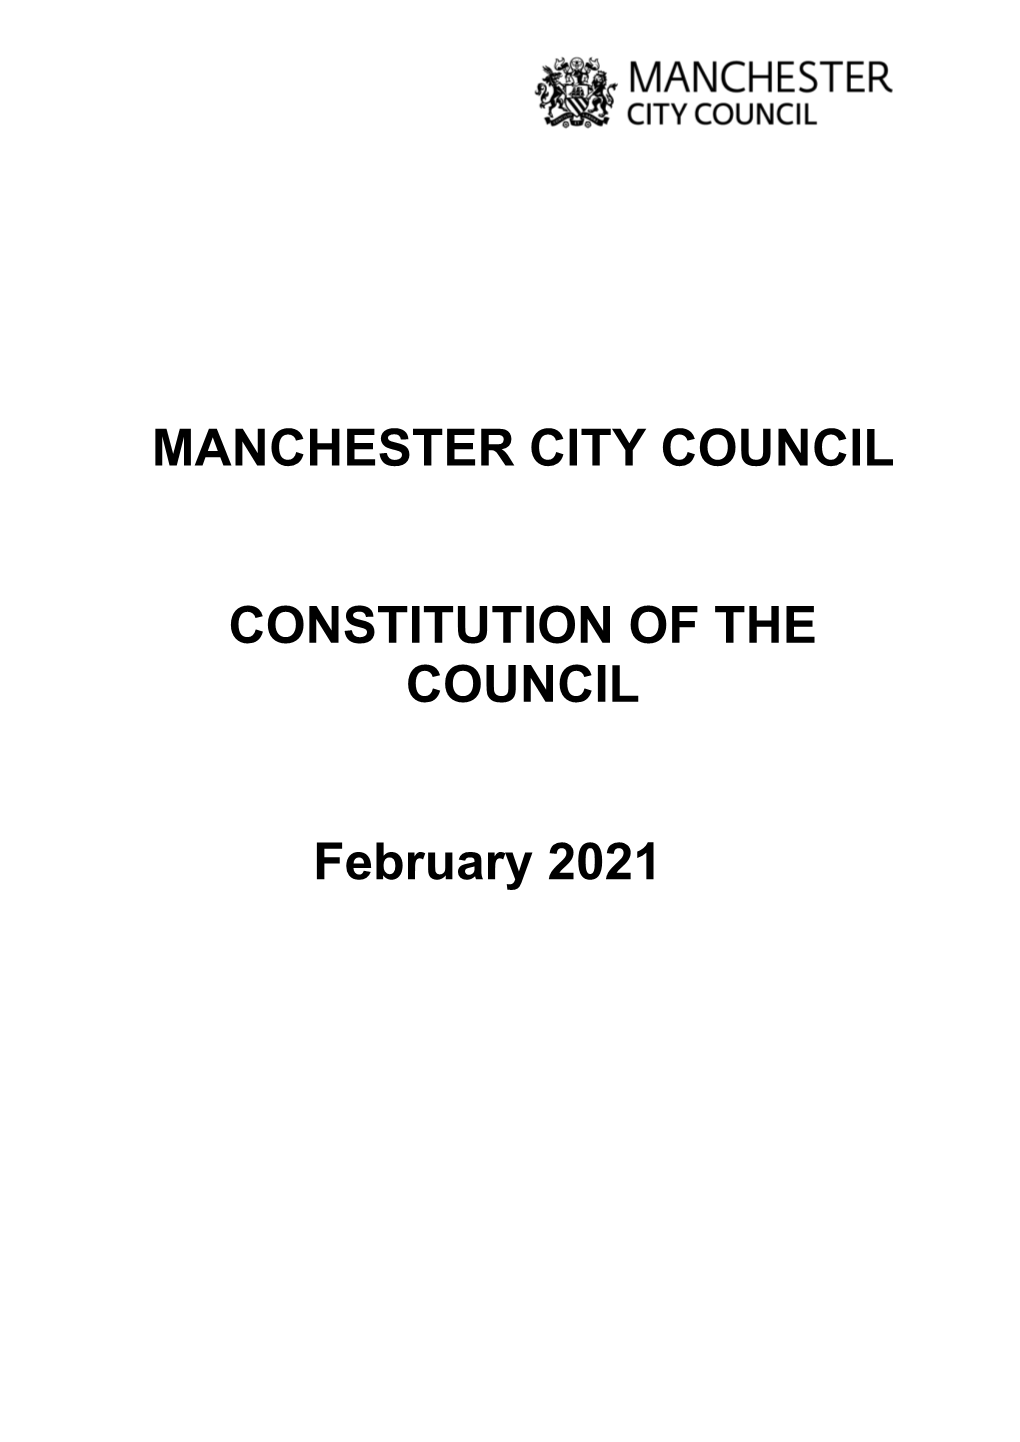 Manchester City Council Constitution of the Council